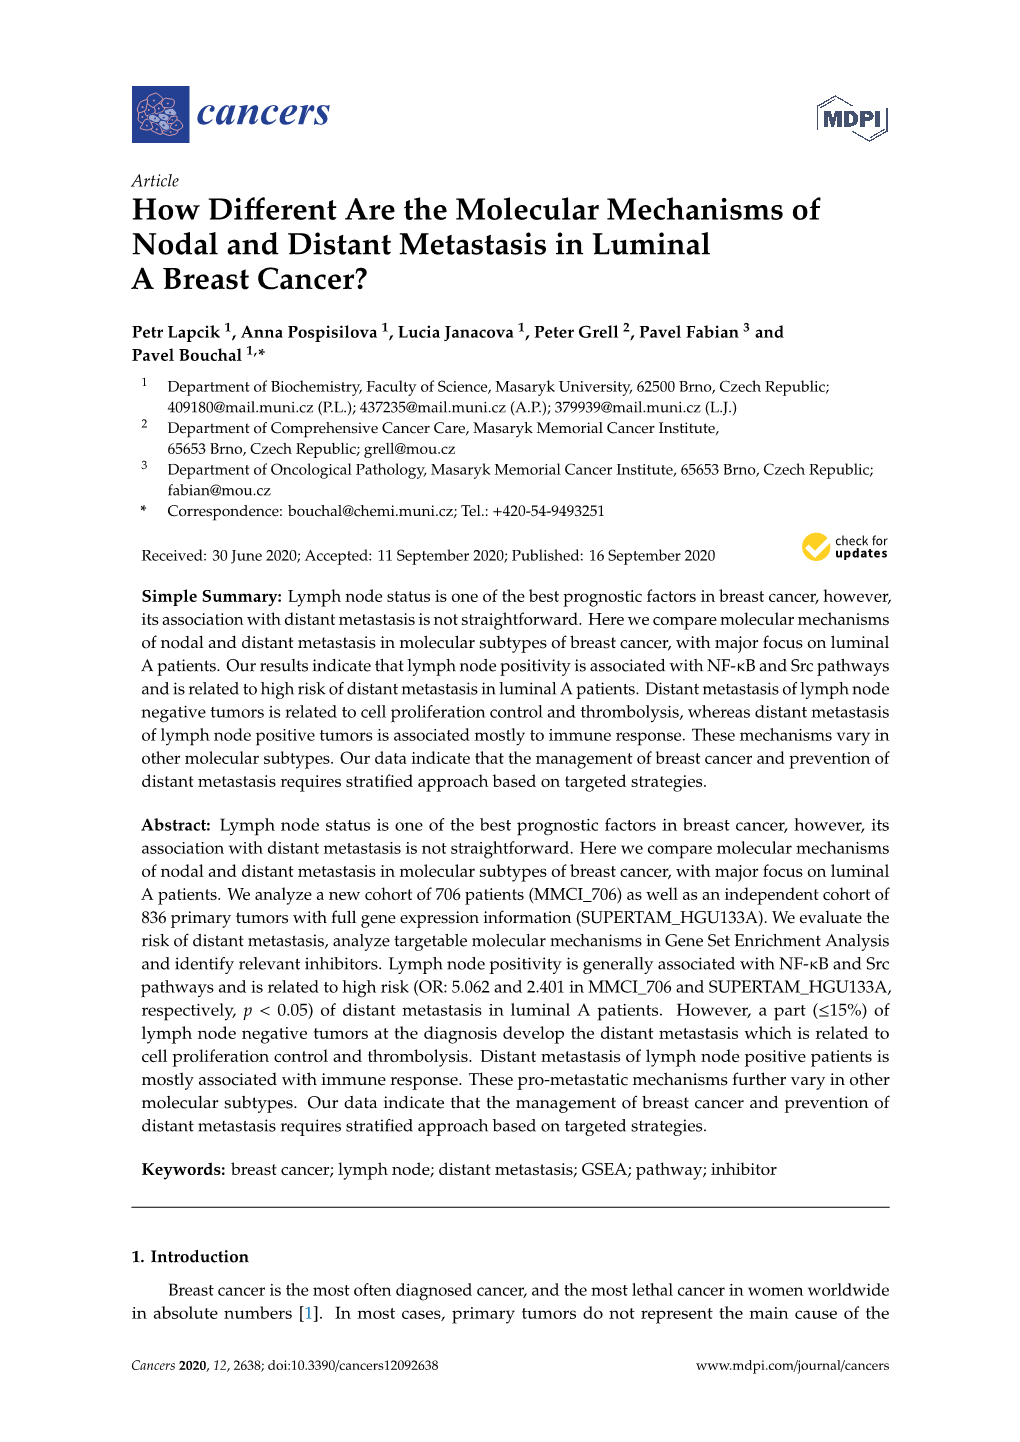 How Different Are the Molecular Mechanisms of Nodal and Distant Metastasis in Luminal a Breast Cancer?